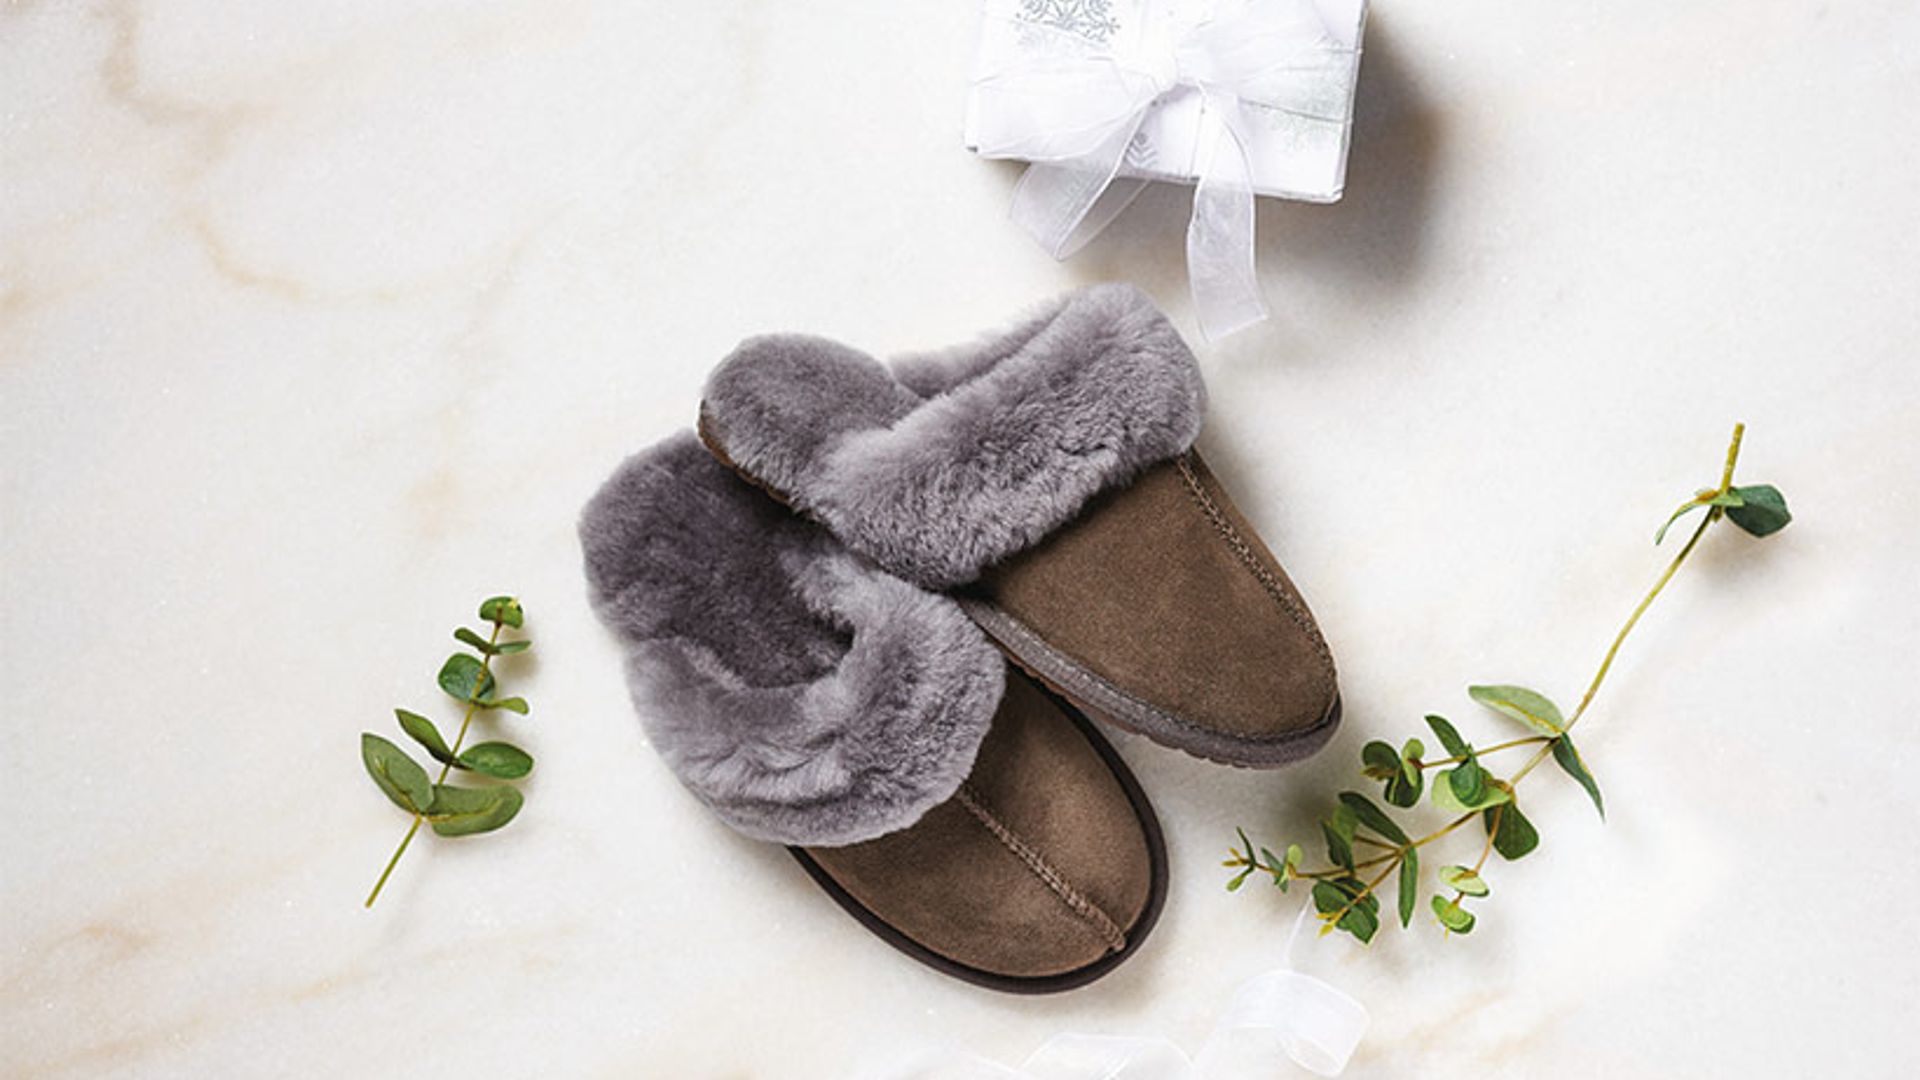 ugg style slipper boots